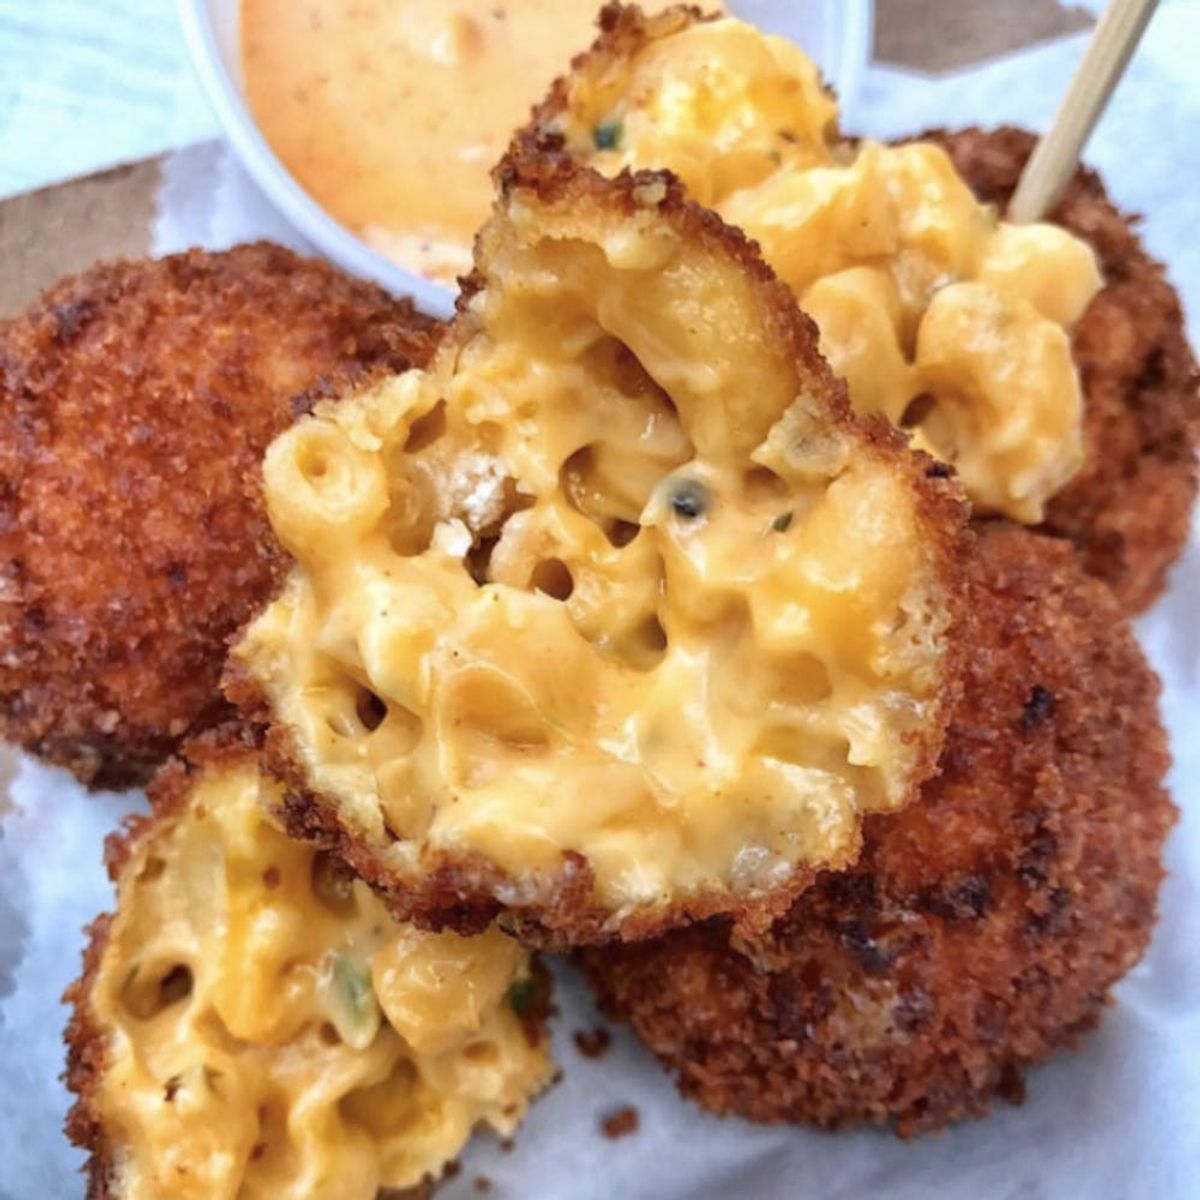 These are the 10 Most Popular Mac and Cheese #Cheatday Meals on Instagram